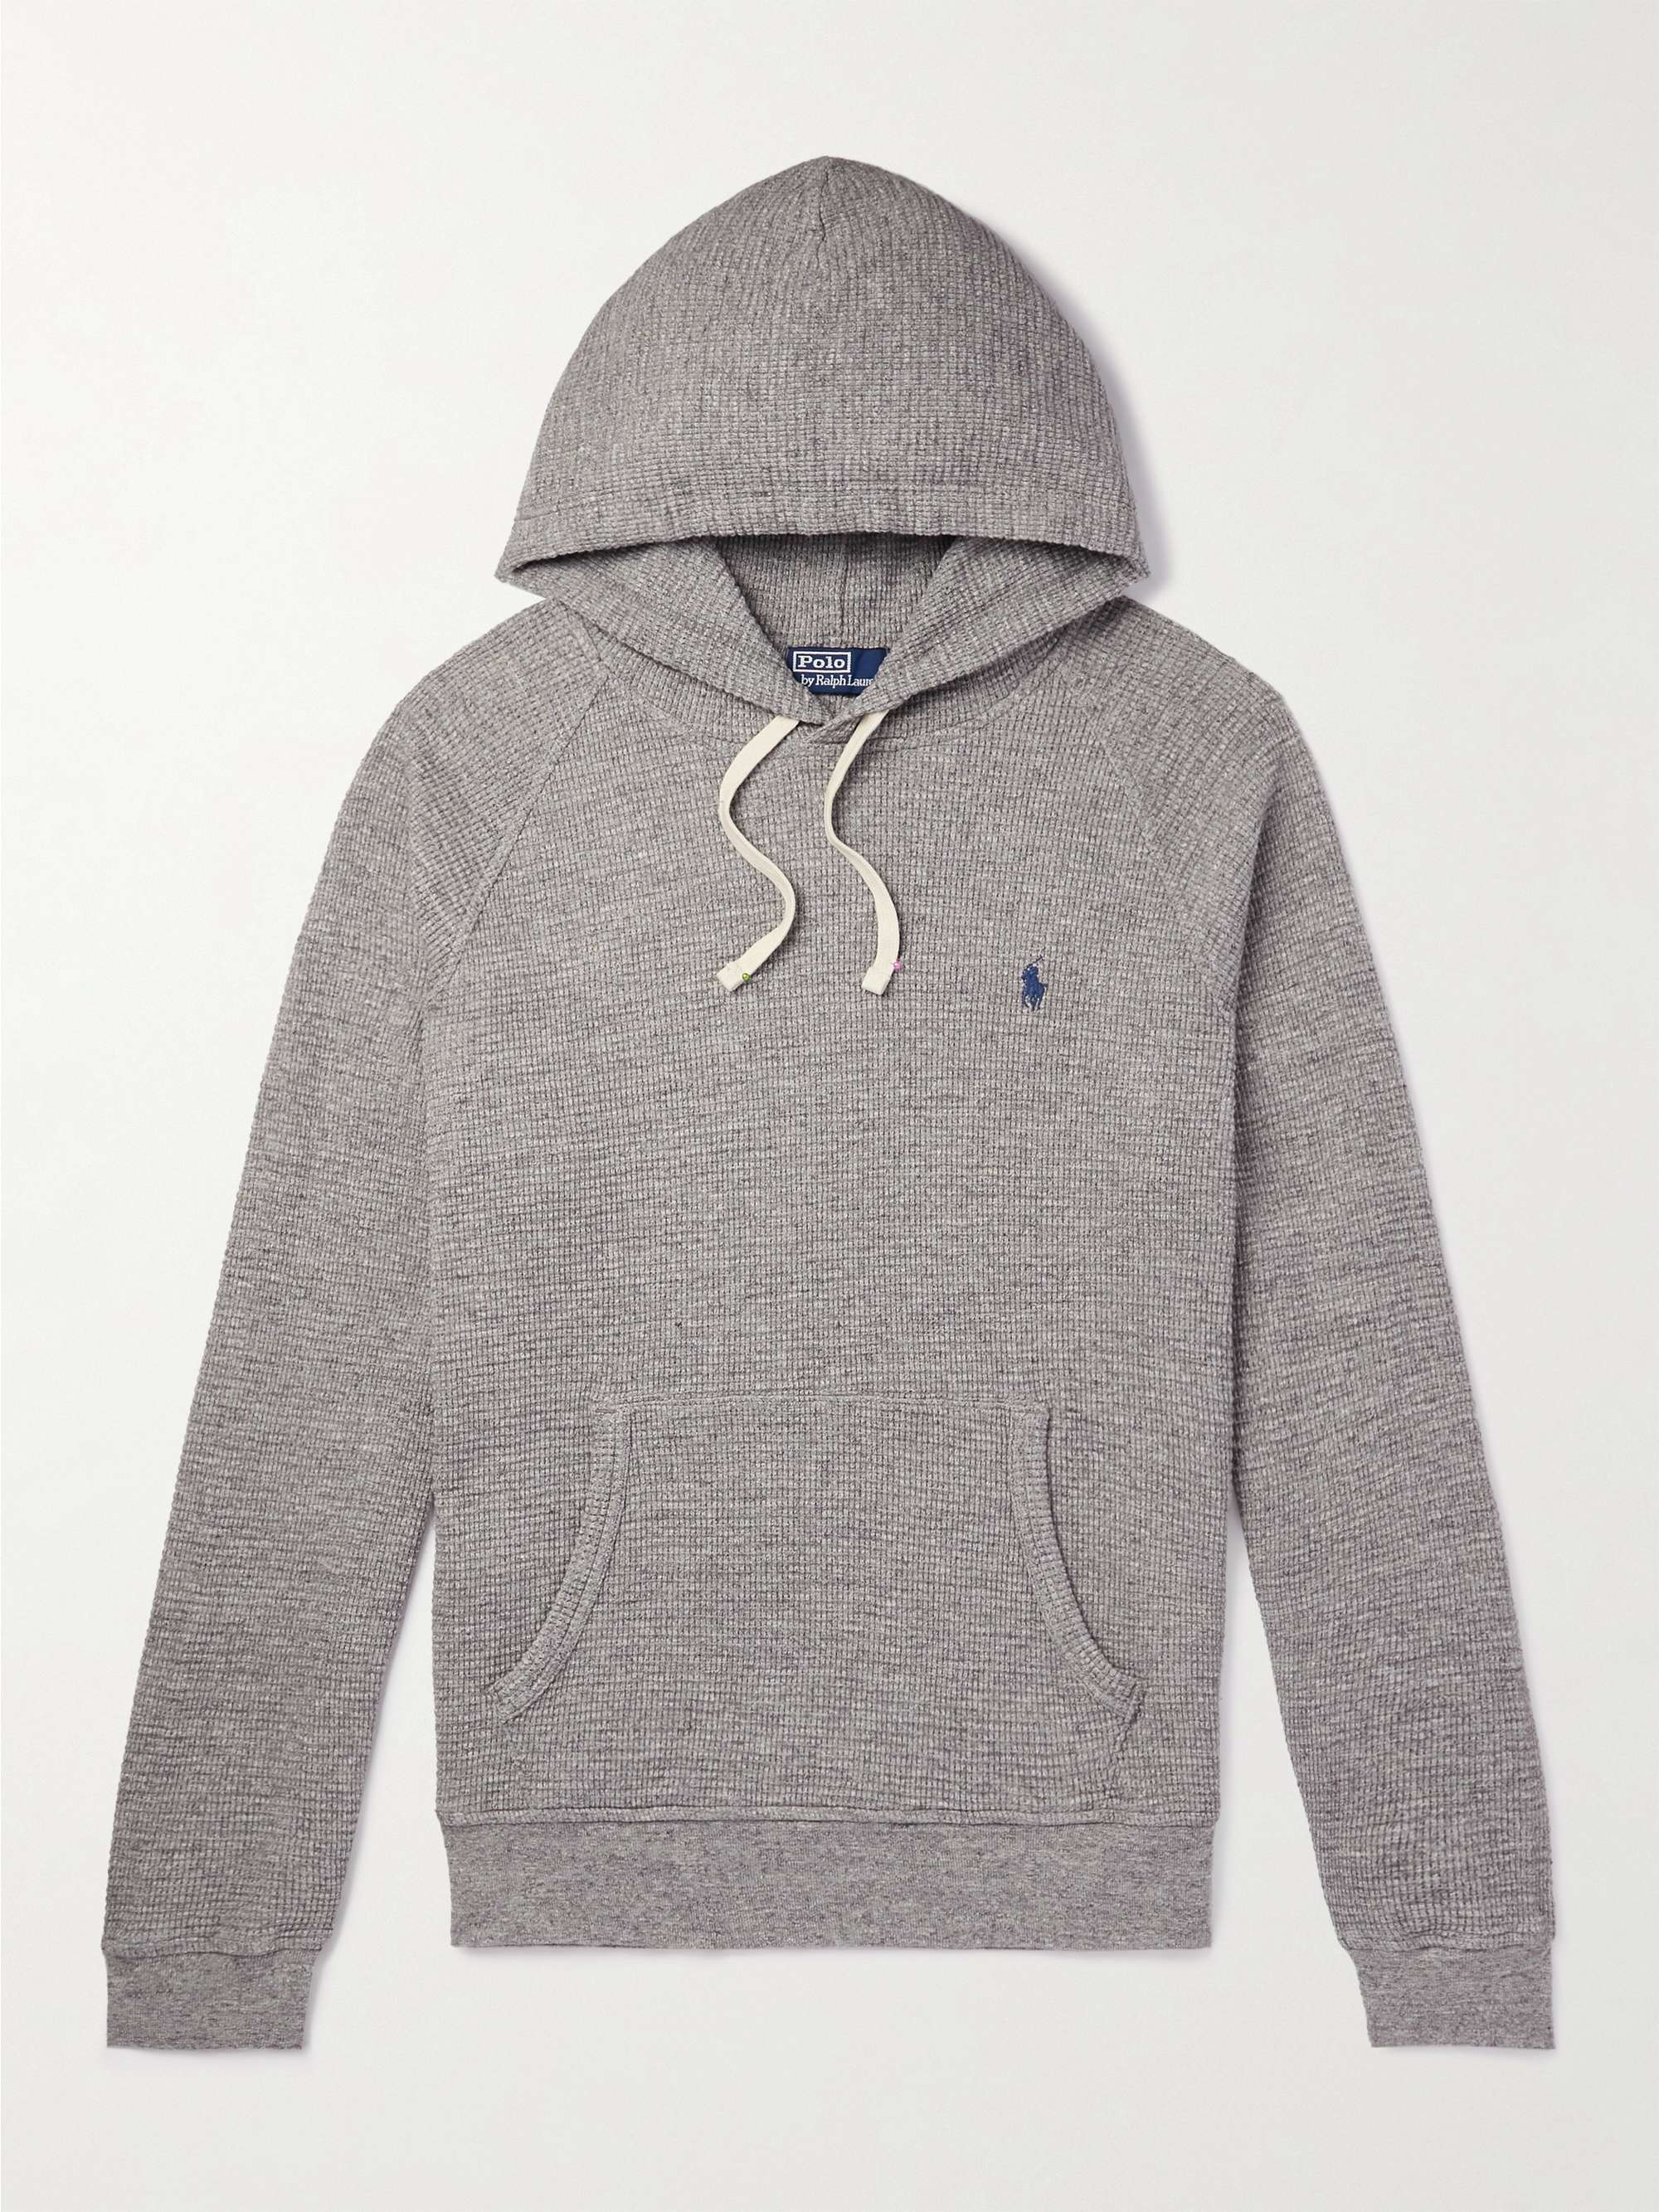 POLO RALPH LAUREN Logo-Embroidered Waffle-Knit Cotton Hoodie | MR PORTER